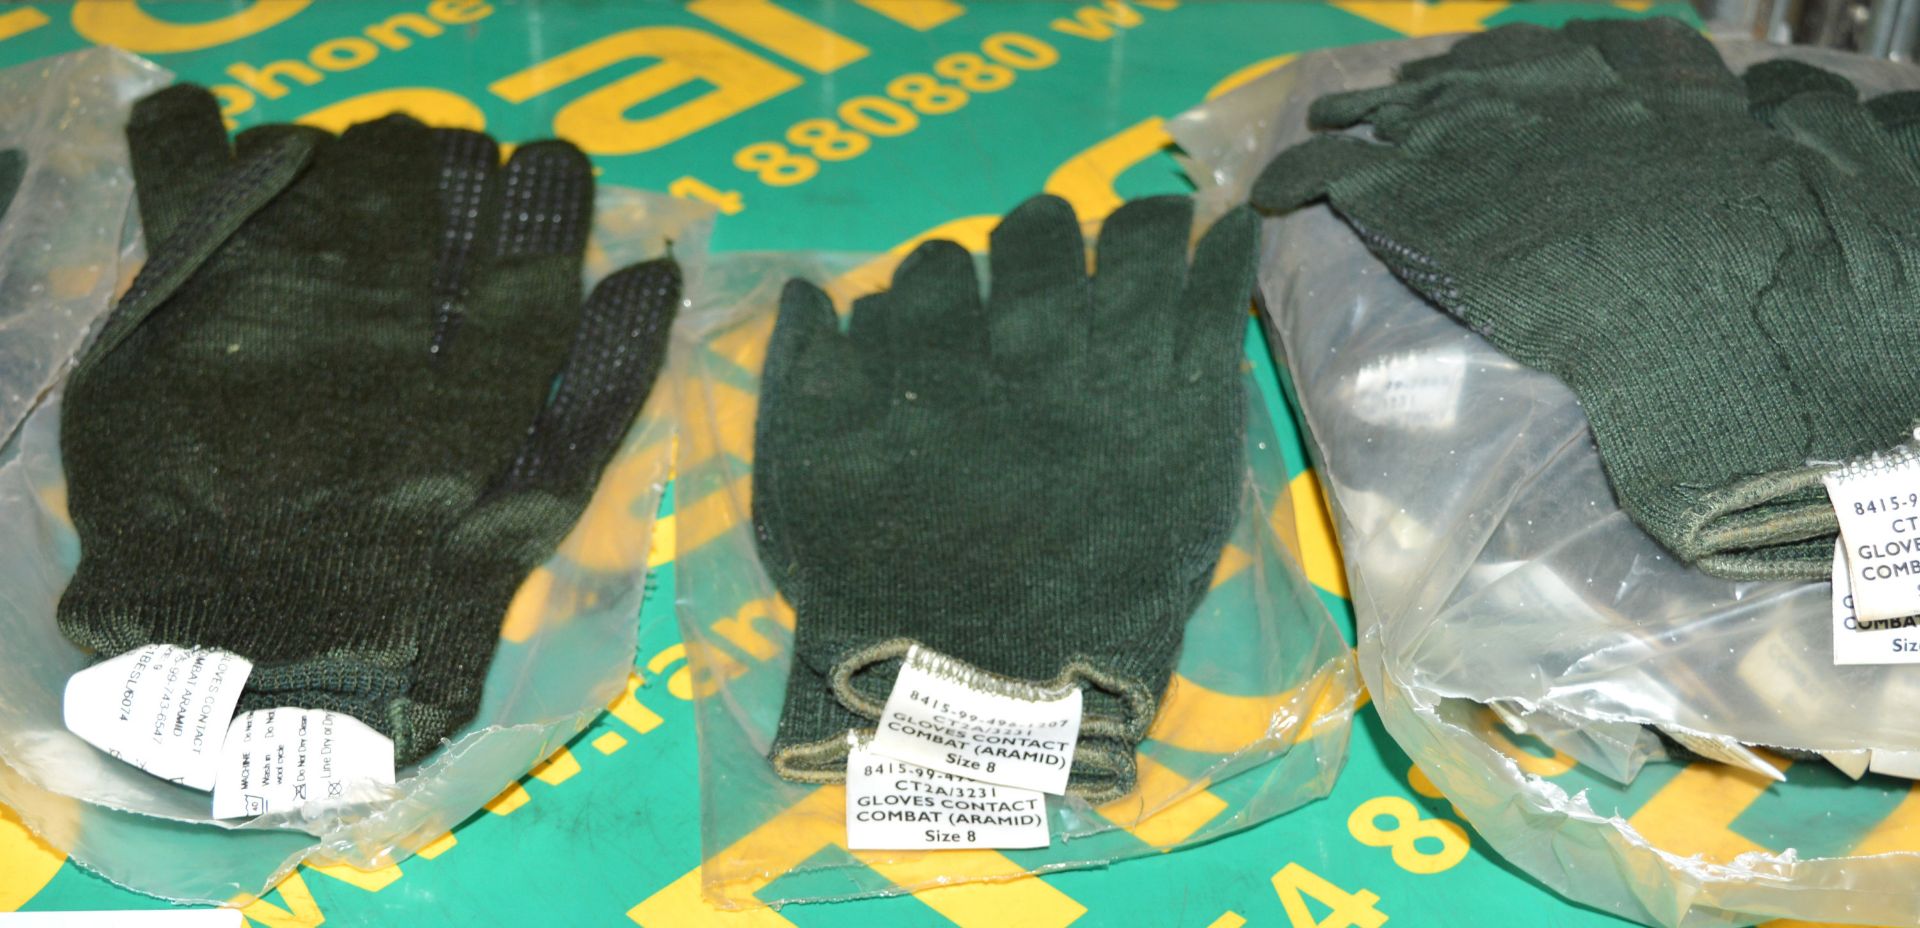 Approx 26x Pairs Gloves - Sizes 8 to 11. - Image 5 of 6